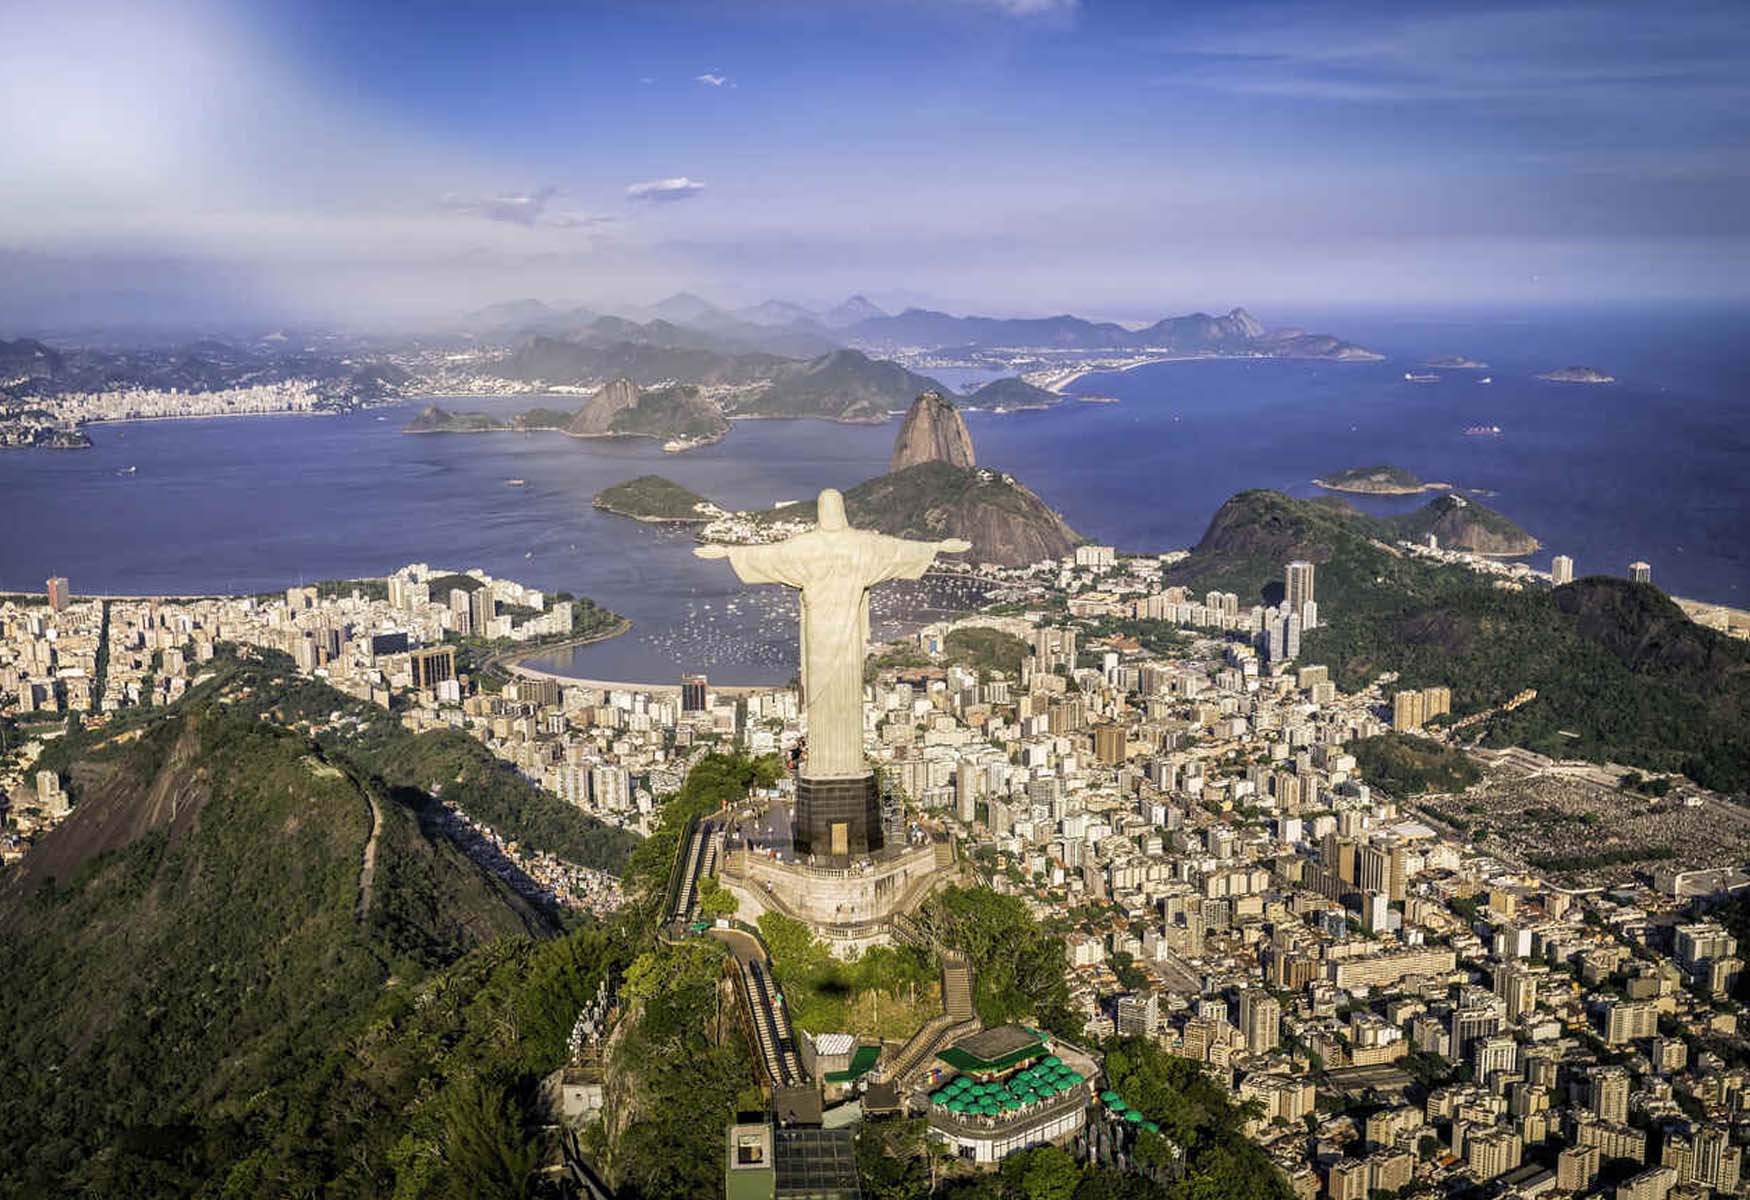 Where To Stay In Rio De Janeiro – The Best Hotels And Neighborhoods